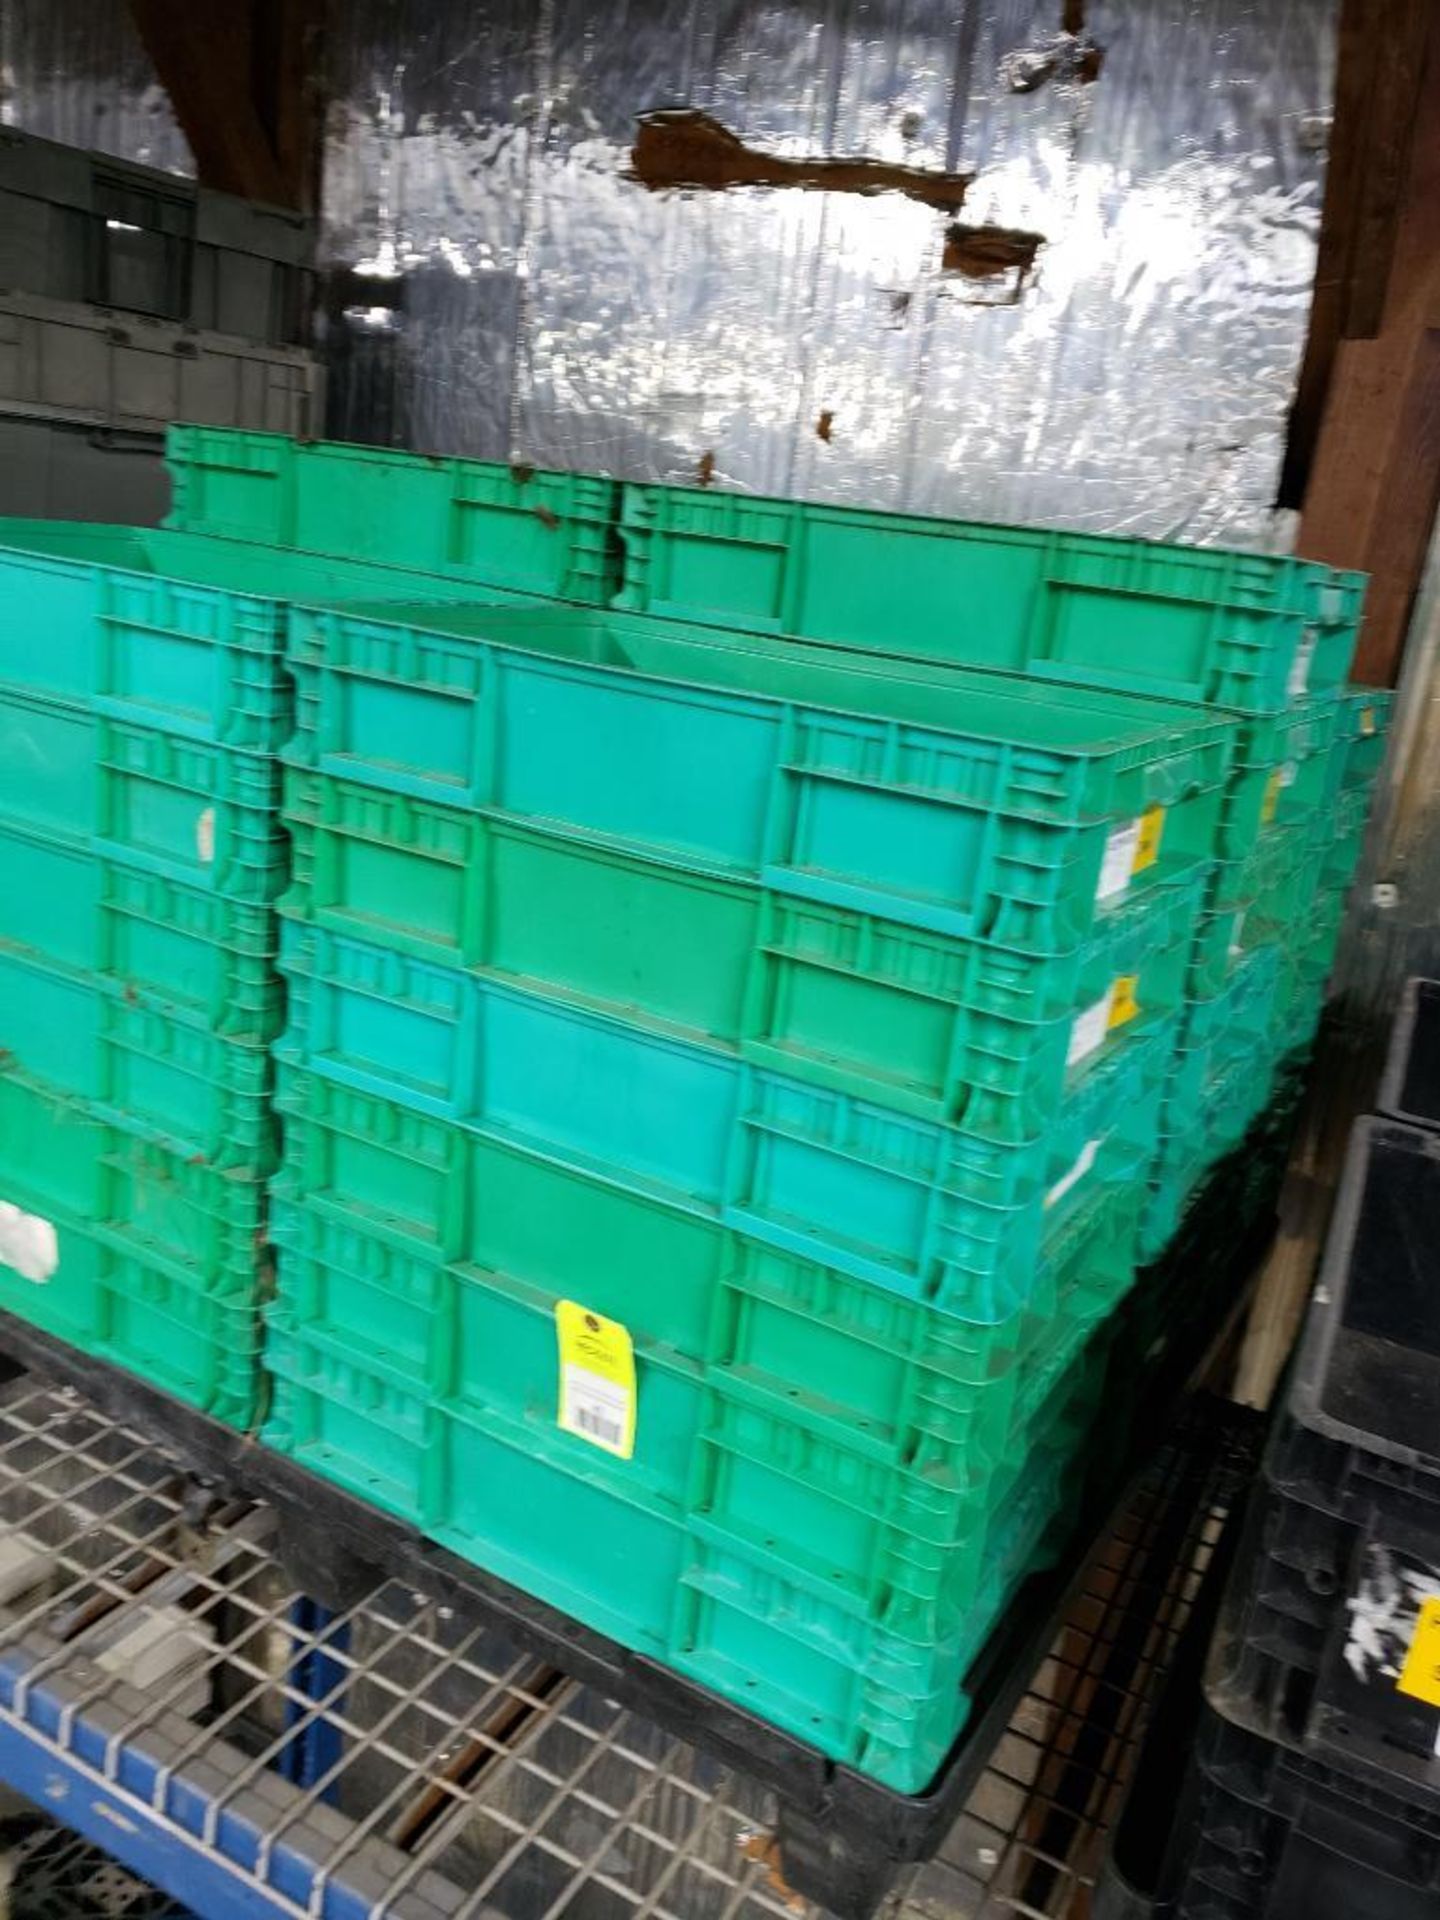 Pallet of plastic totes. - Image 2 of 2